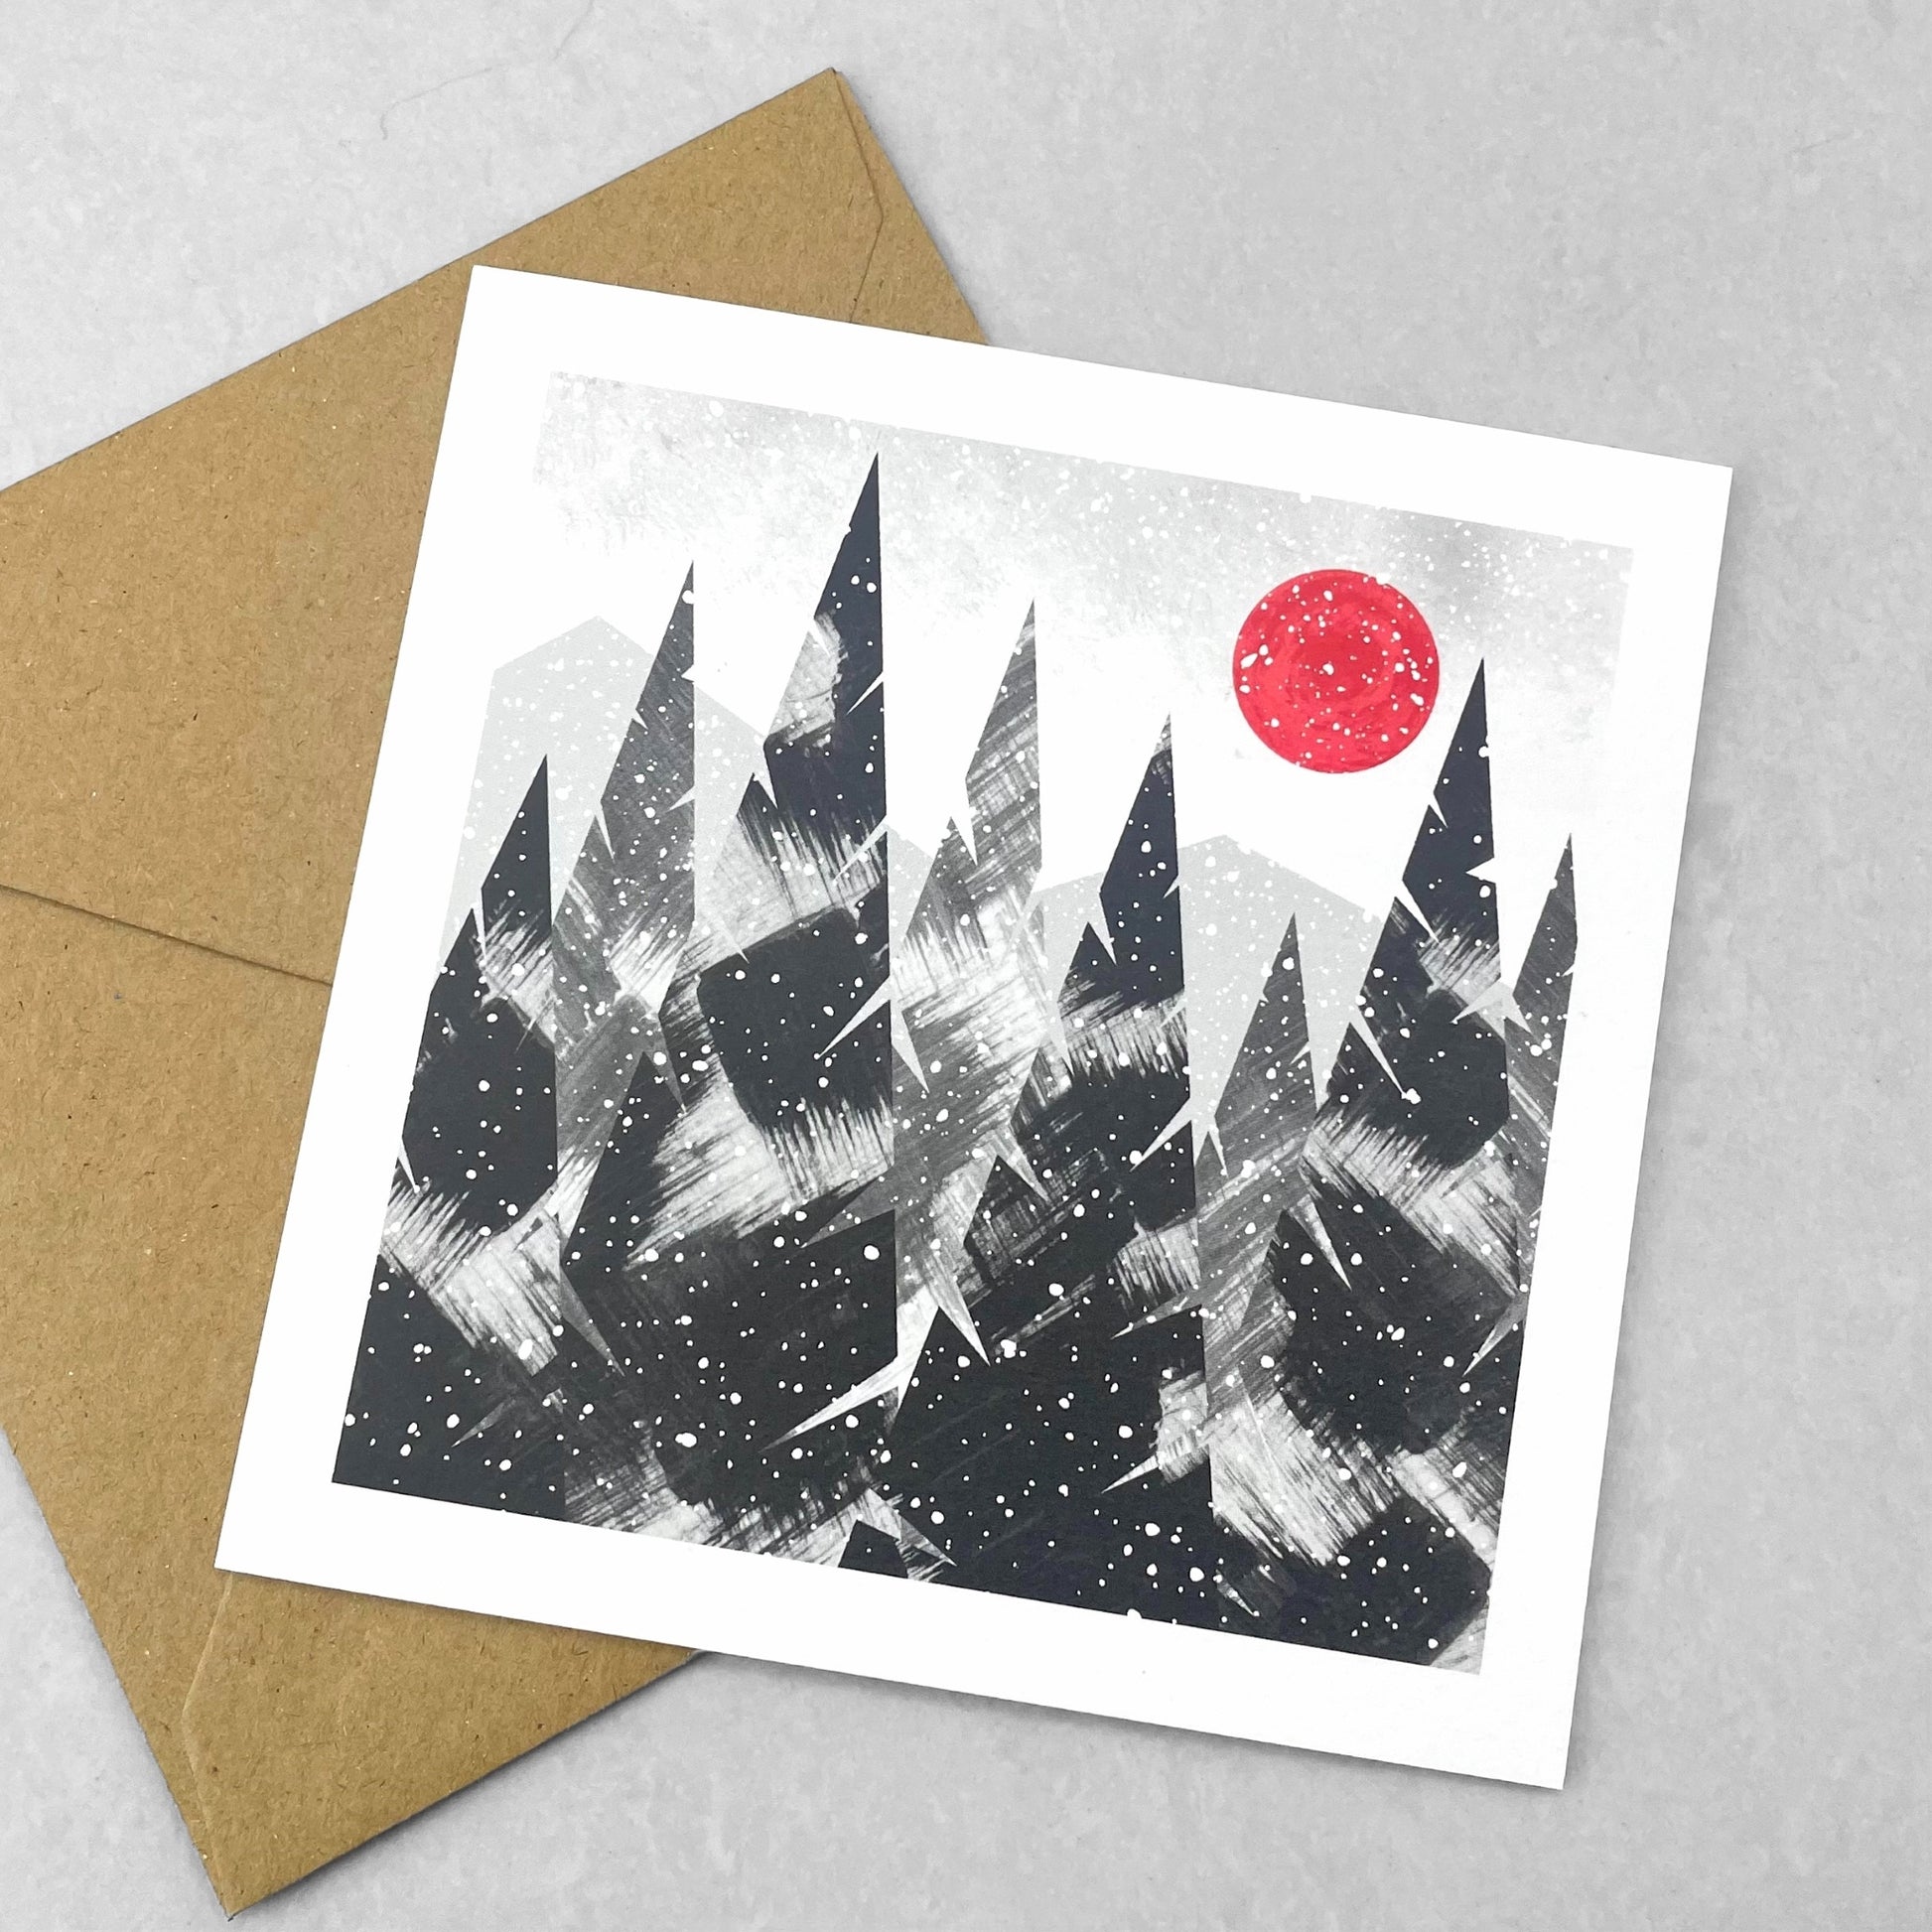 A pack of 4 cards with different designs inspired by snowfall, by Ruth Thorp Studio. Trees with a deep red sun in the snow